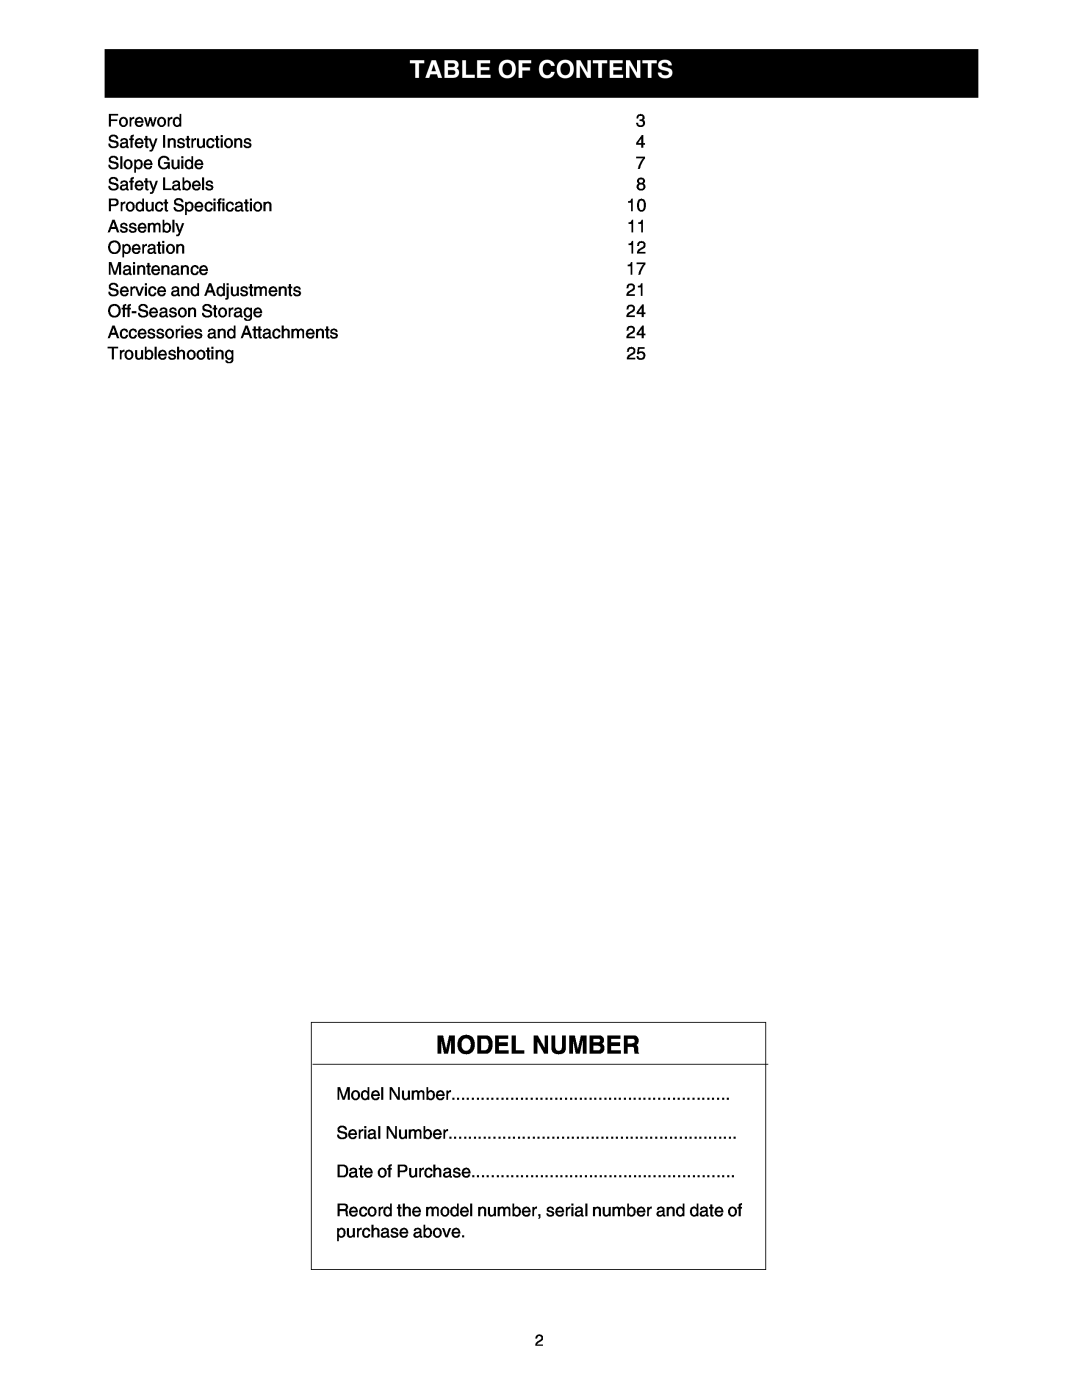 Cub Cadet G 1236 service manual Table Of Contents, Model Number 